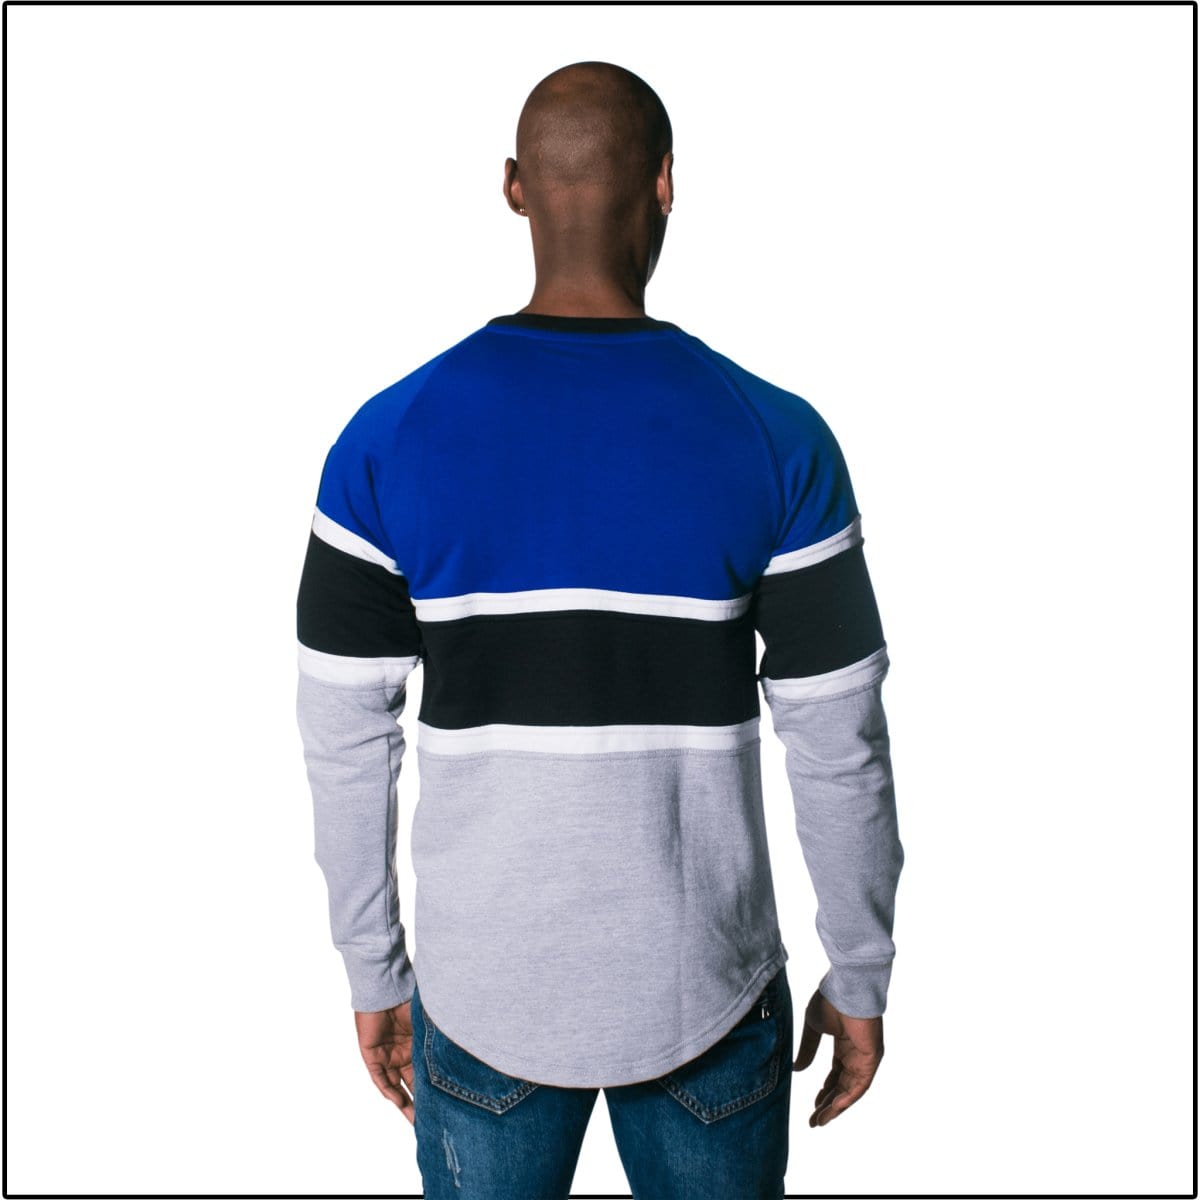 J.Hinton Collections Apparel & Accessories The Skyline- Royal Striped Sweatshirt